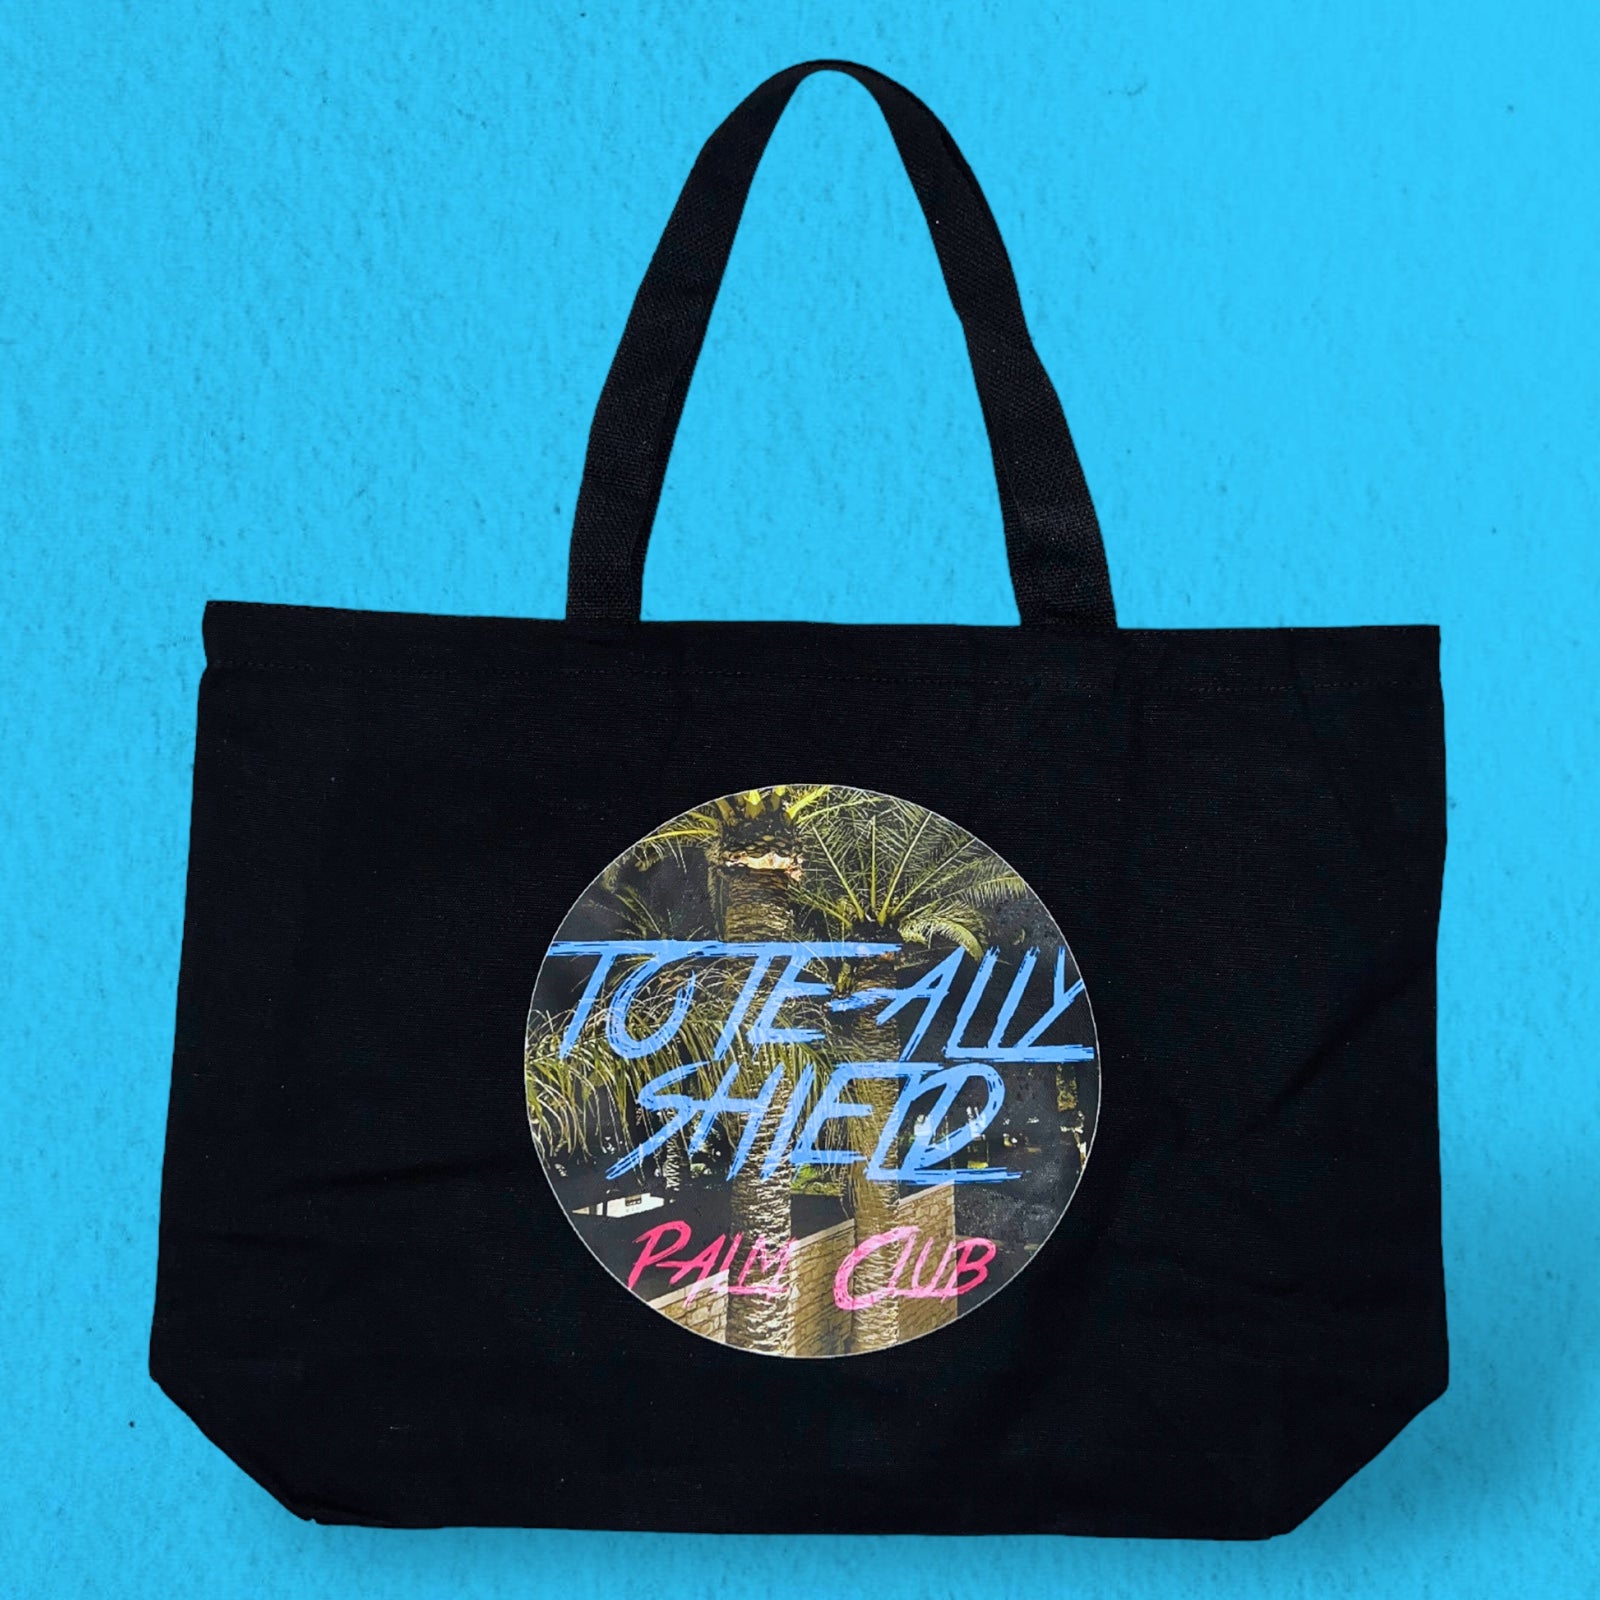 Front view of the TOTE-ALLY SHIELD Tote Bag in black canvas, featuring the PALM CLUB print on both the front and rear sides.